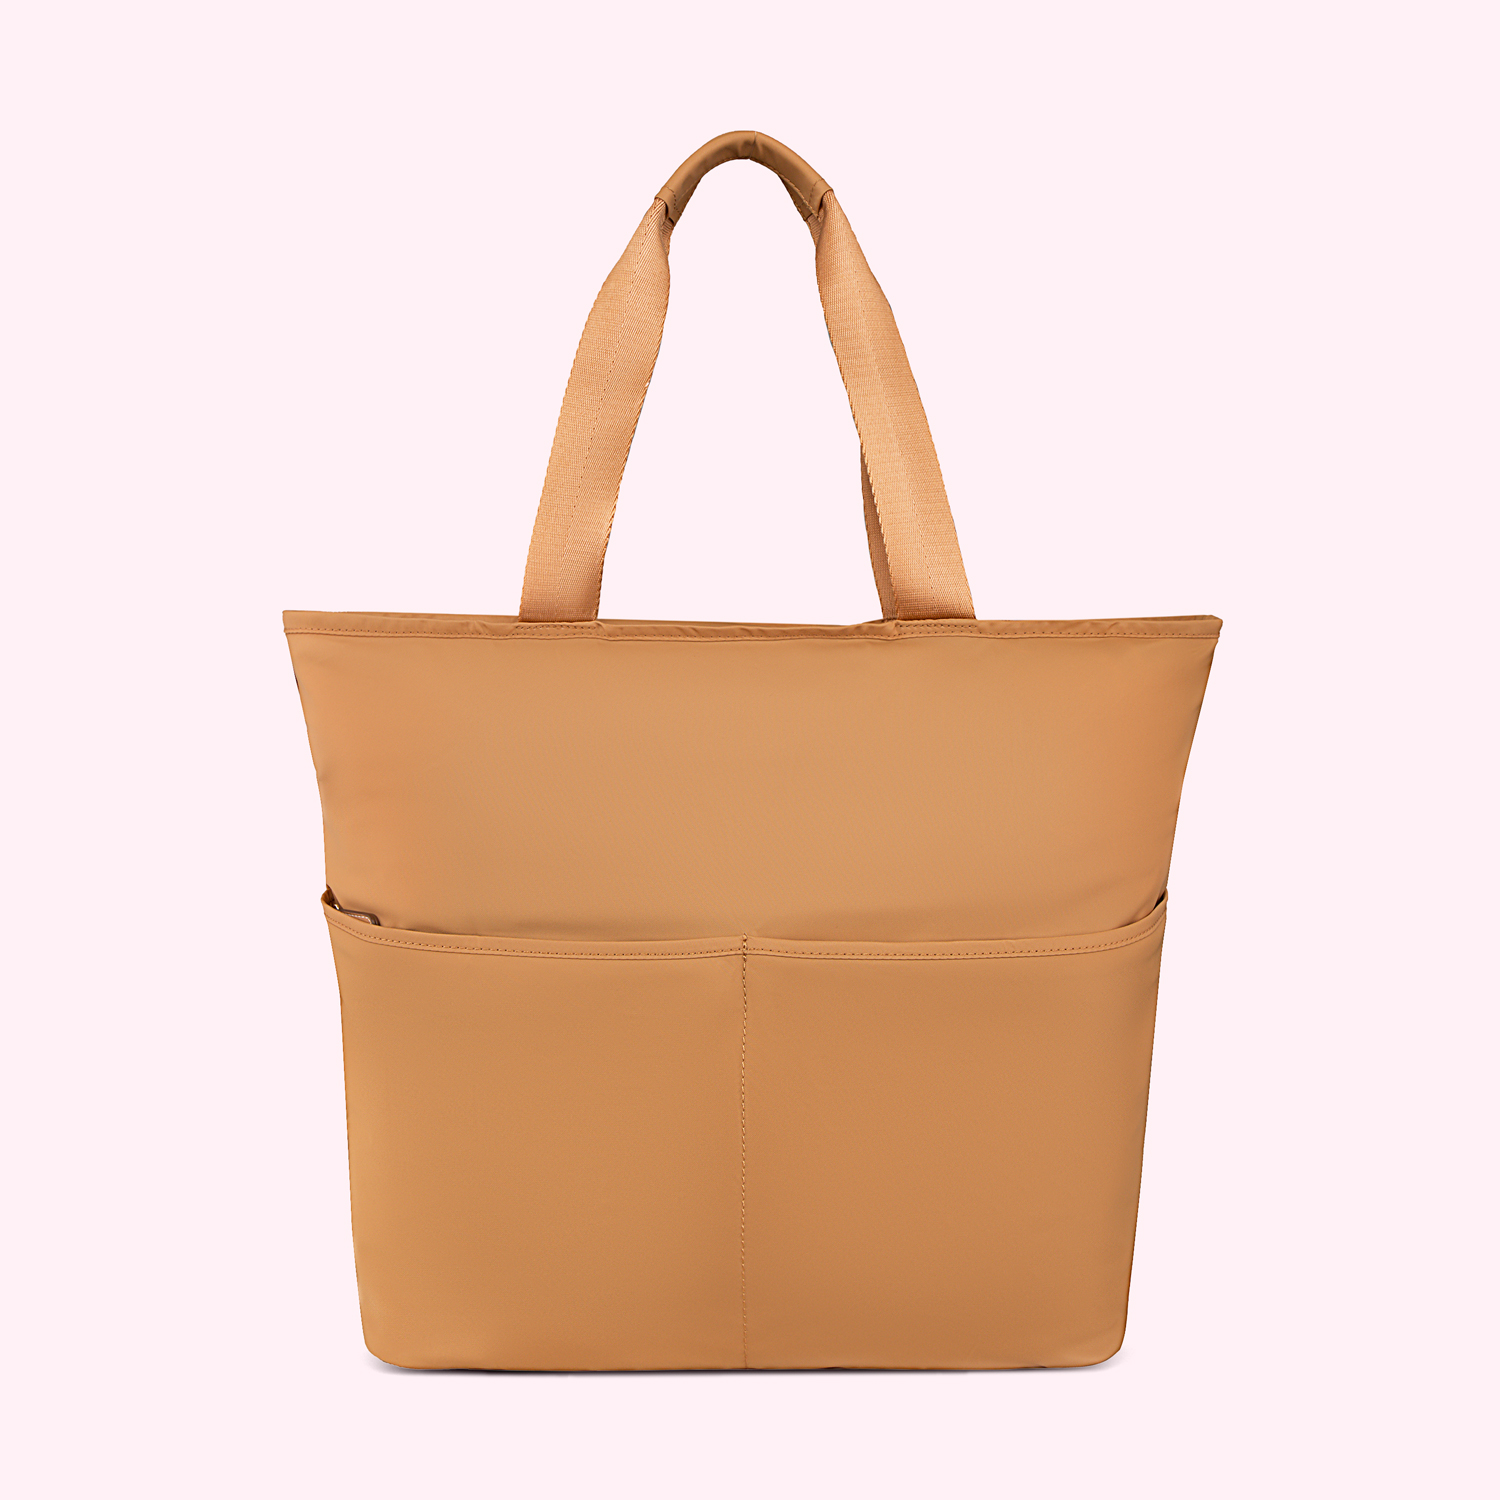 The Sweet NEW Small Utility Tote